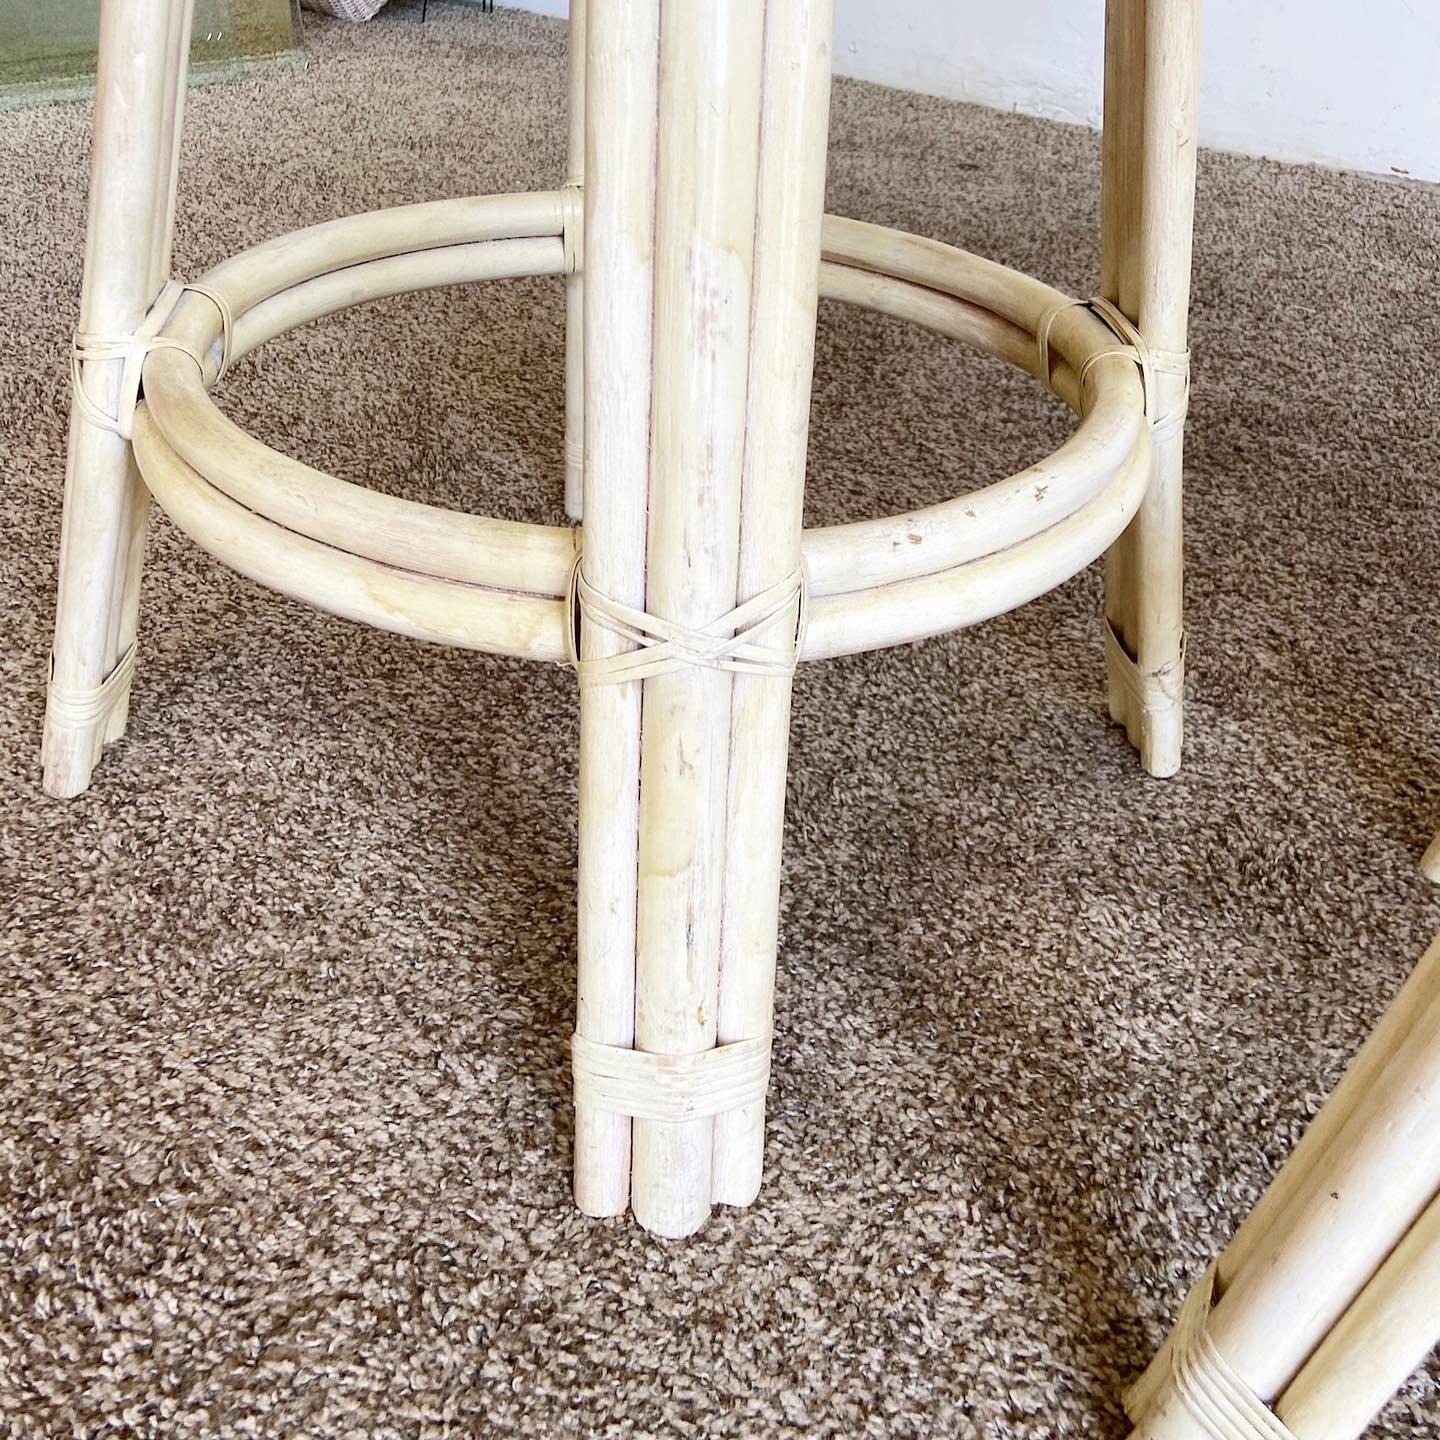 Boho Chic Cream Finish Bamboo Bar Stools - Set of 3 In Good Condition For Sale In Delray Beach, FL